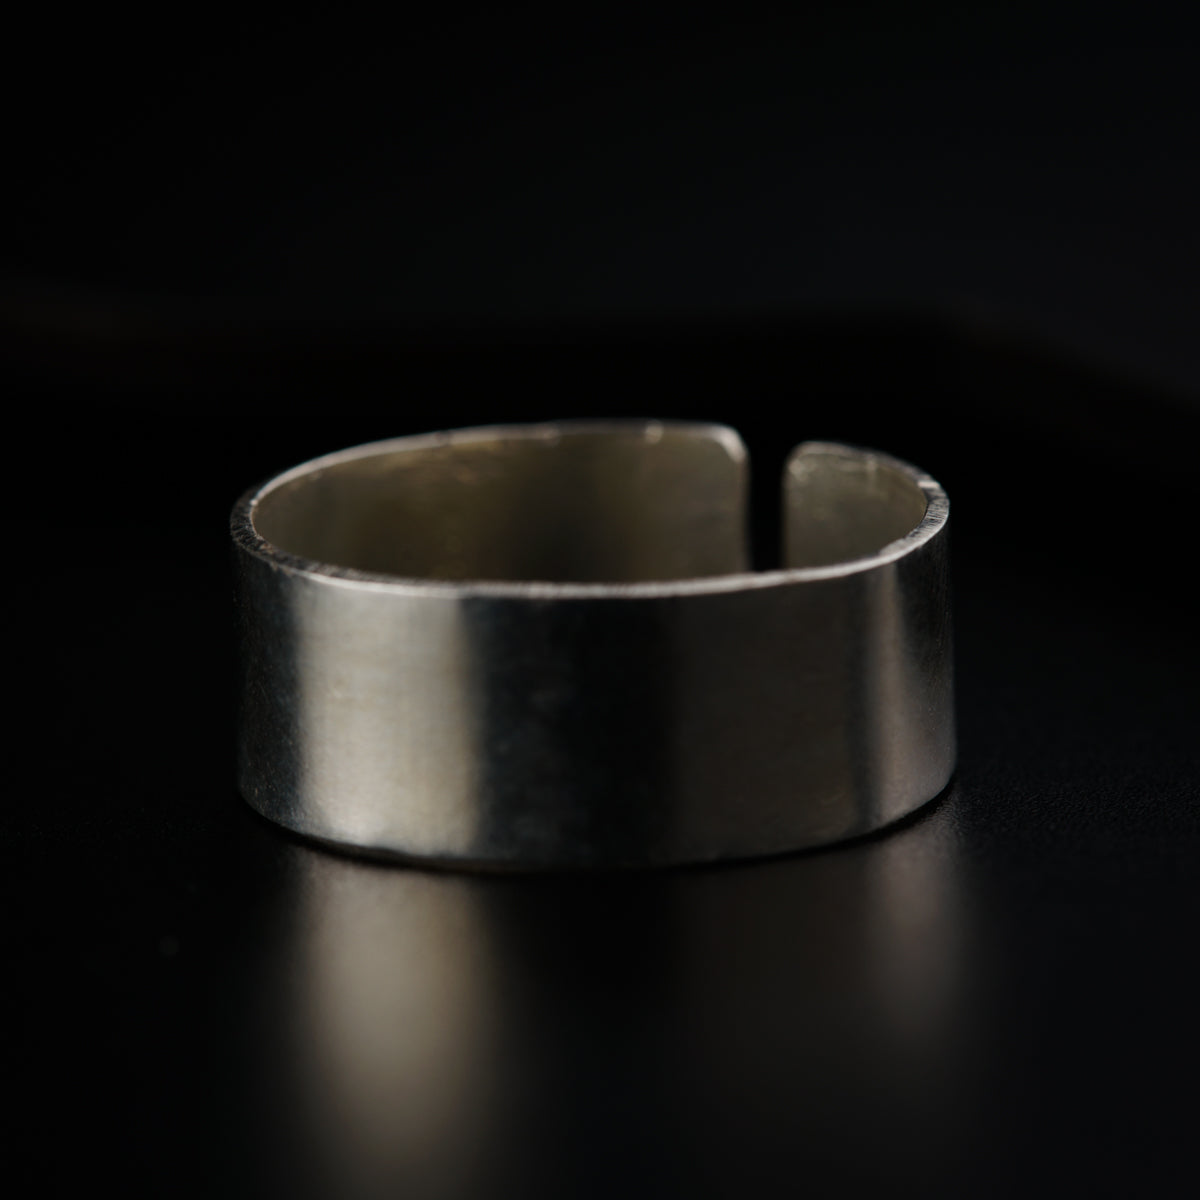 a close up of a ring on a table